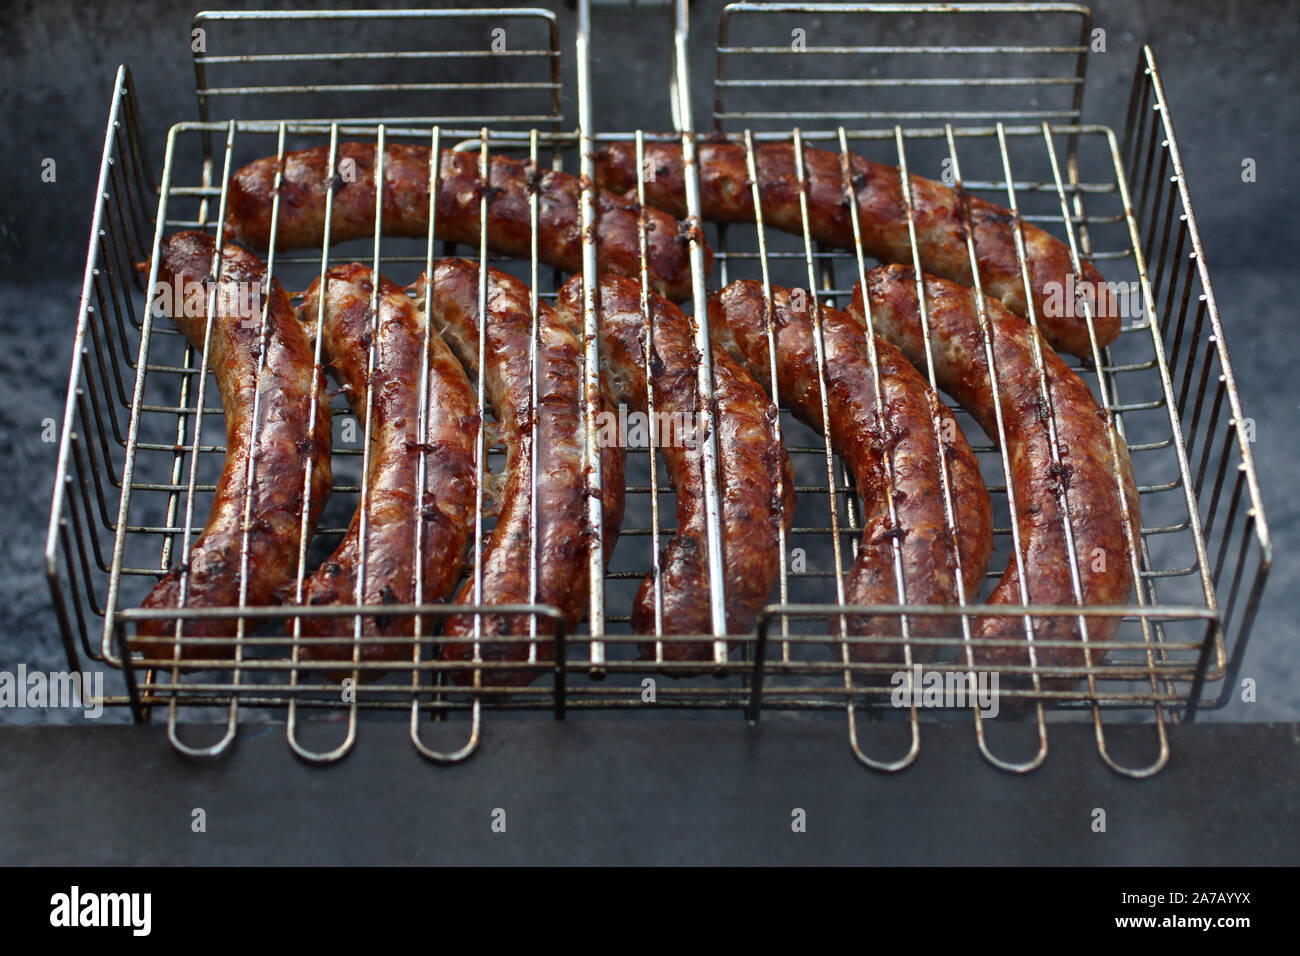 Meat sausages squeezed between grill grates, frying on a grill brazier  Stock Photo - Alamy